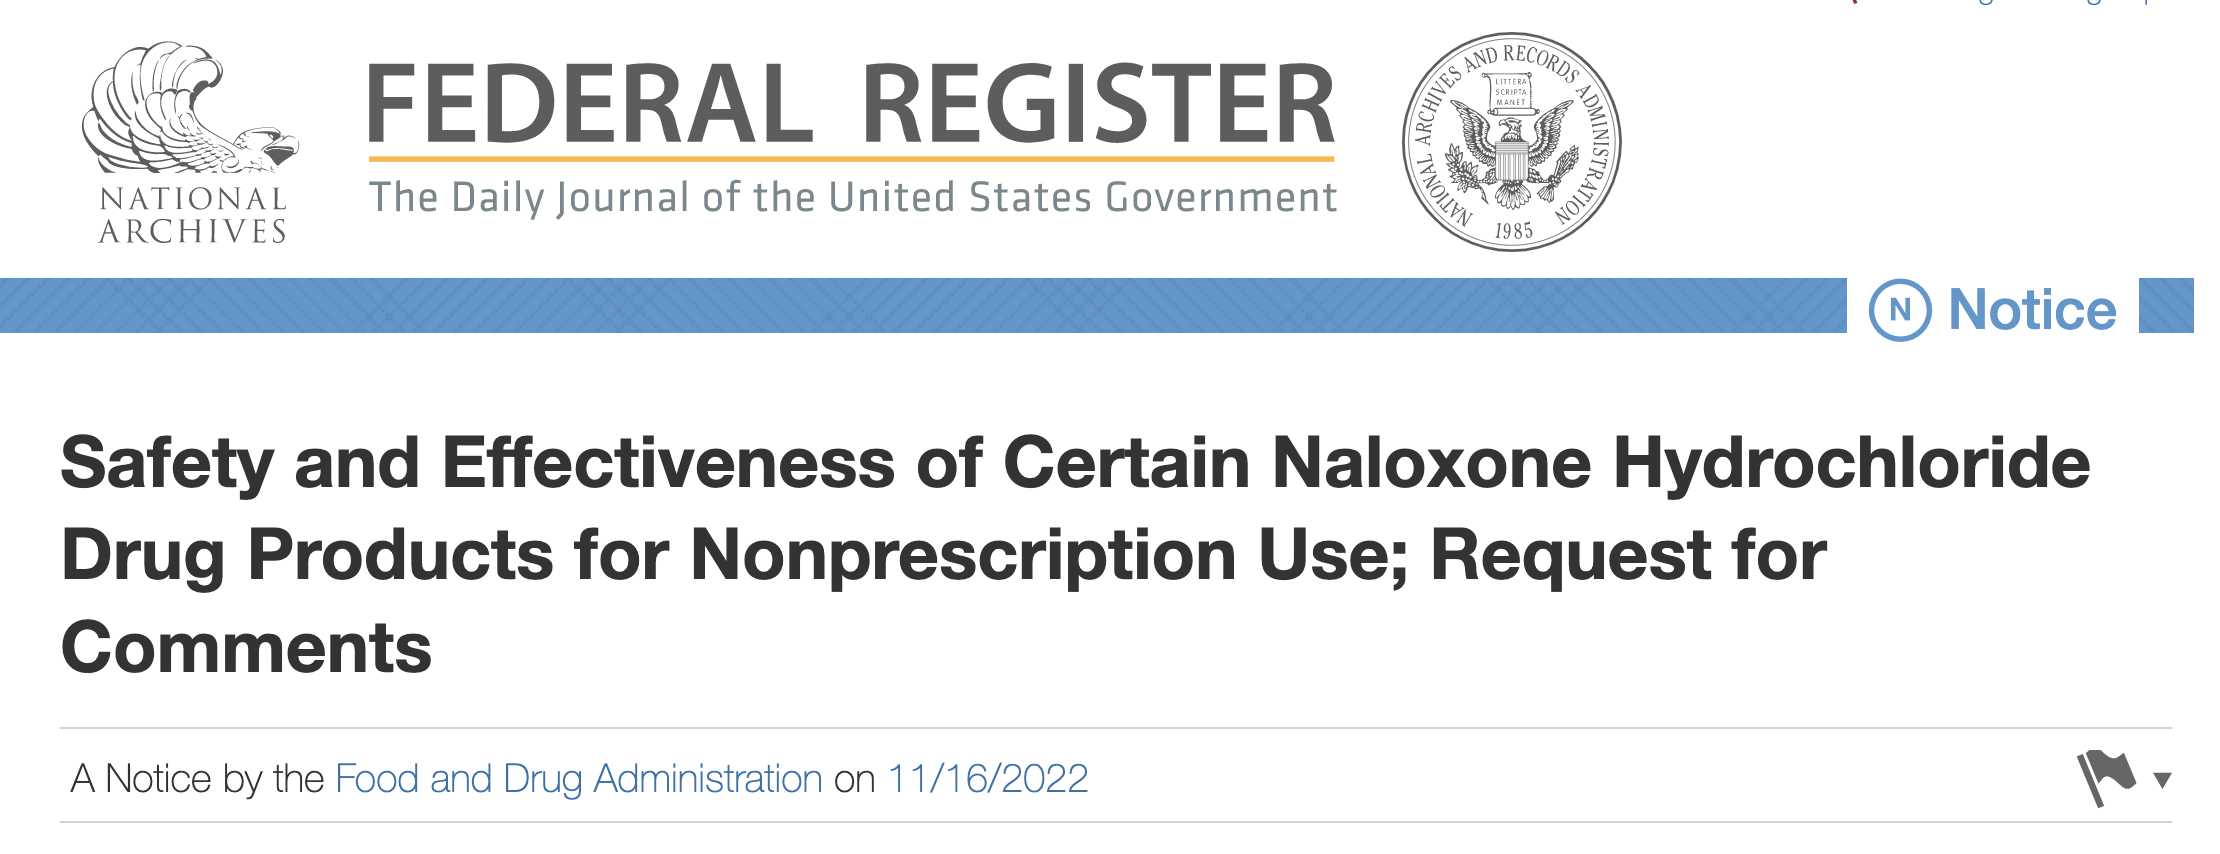 The U.S. Food and Drug Administration submitted a Federal Register soliciting comments on whether certain naloxone drug products should be available over-the-counter without a prescription. Public comment is open until January 17, 2023.